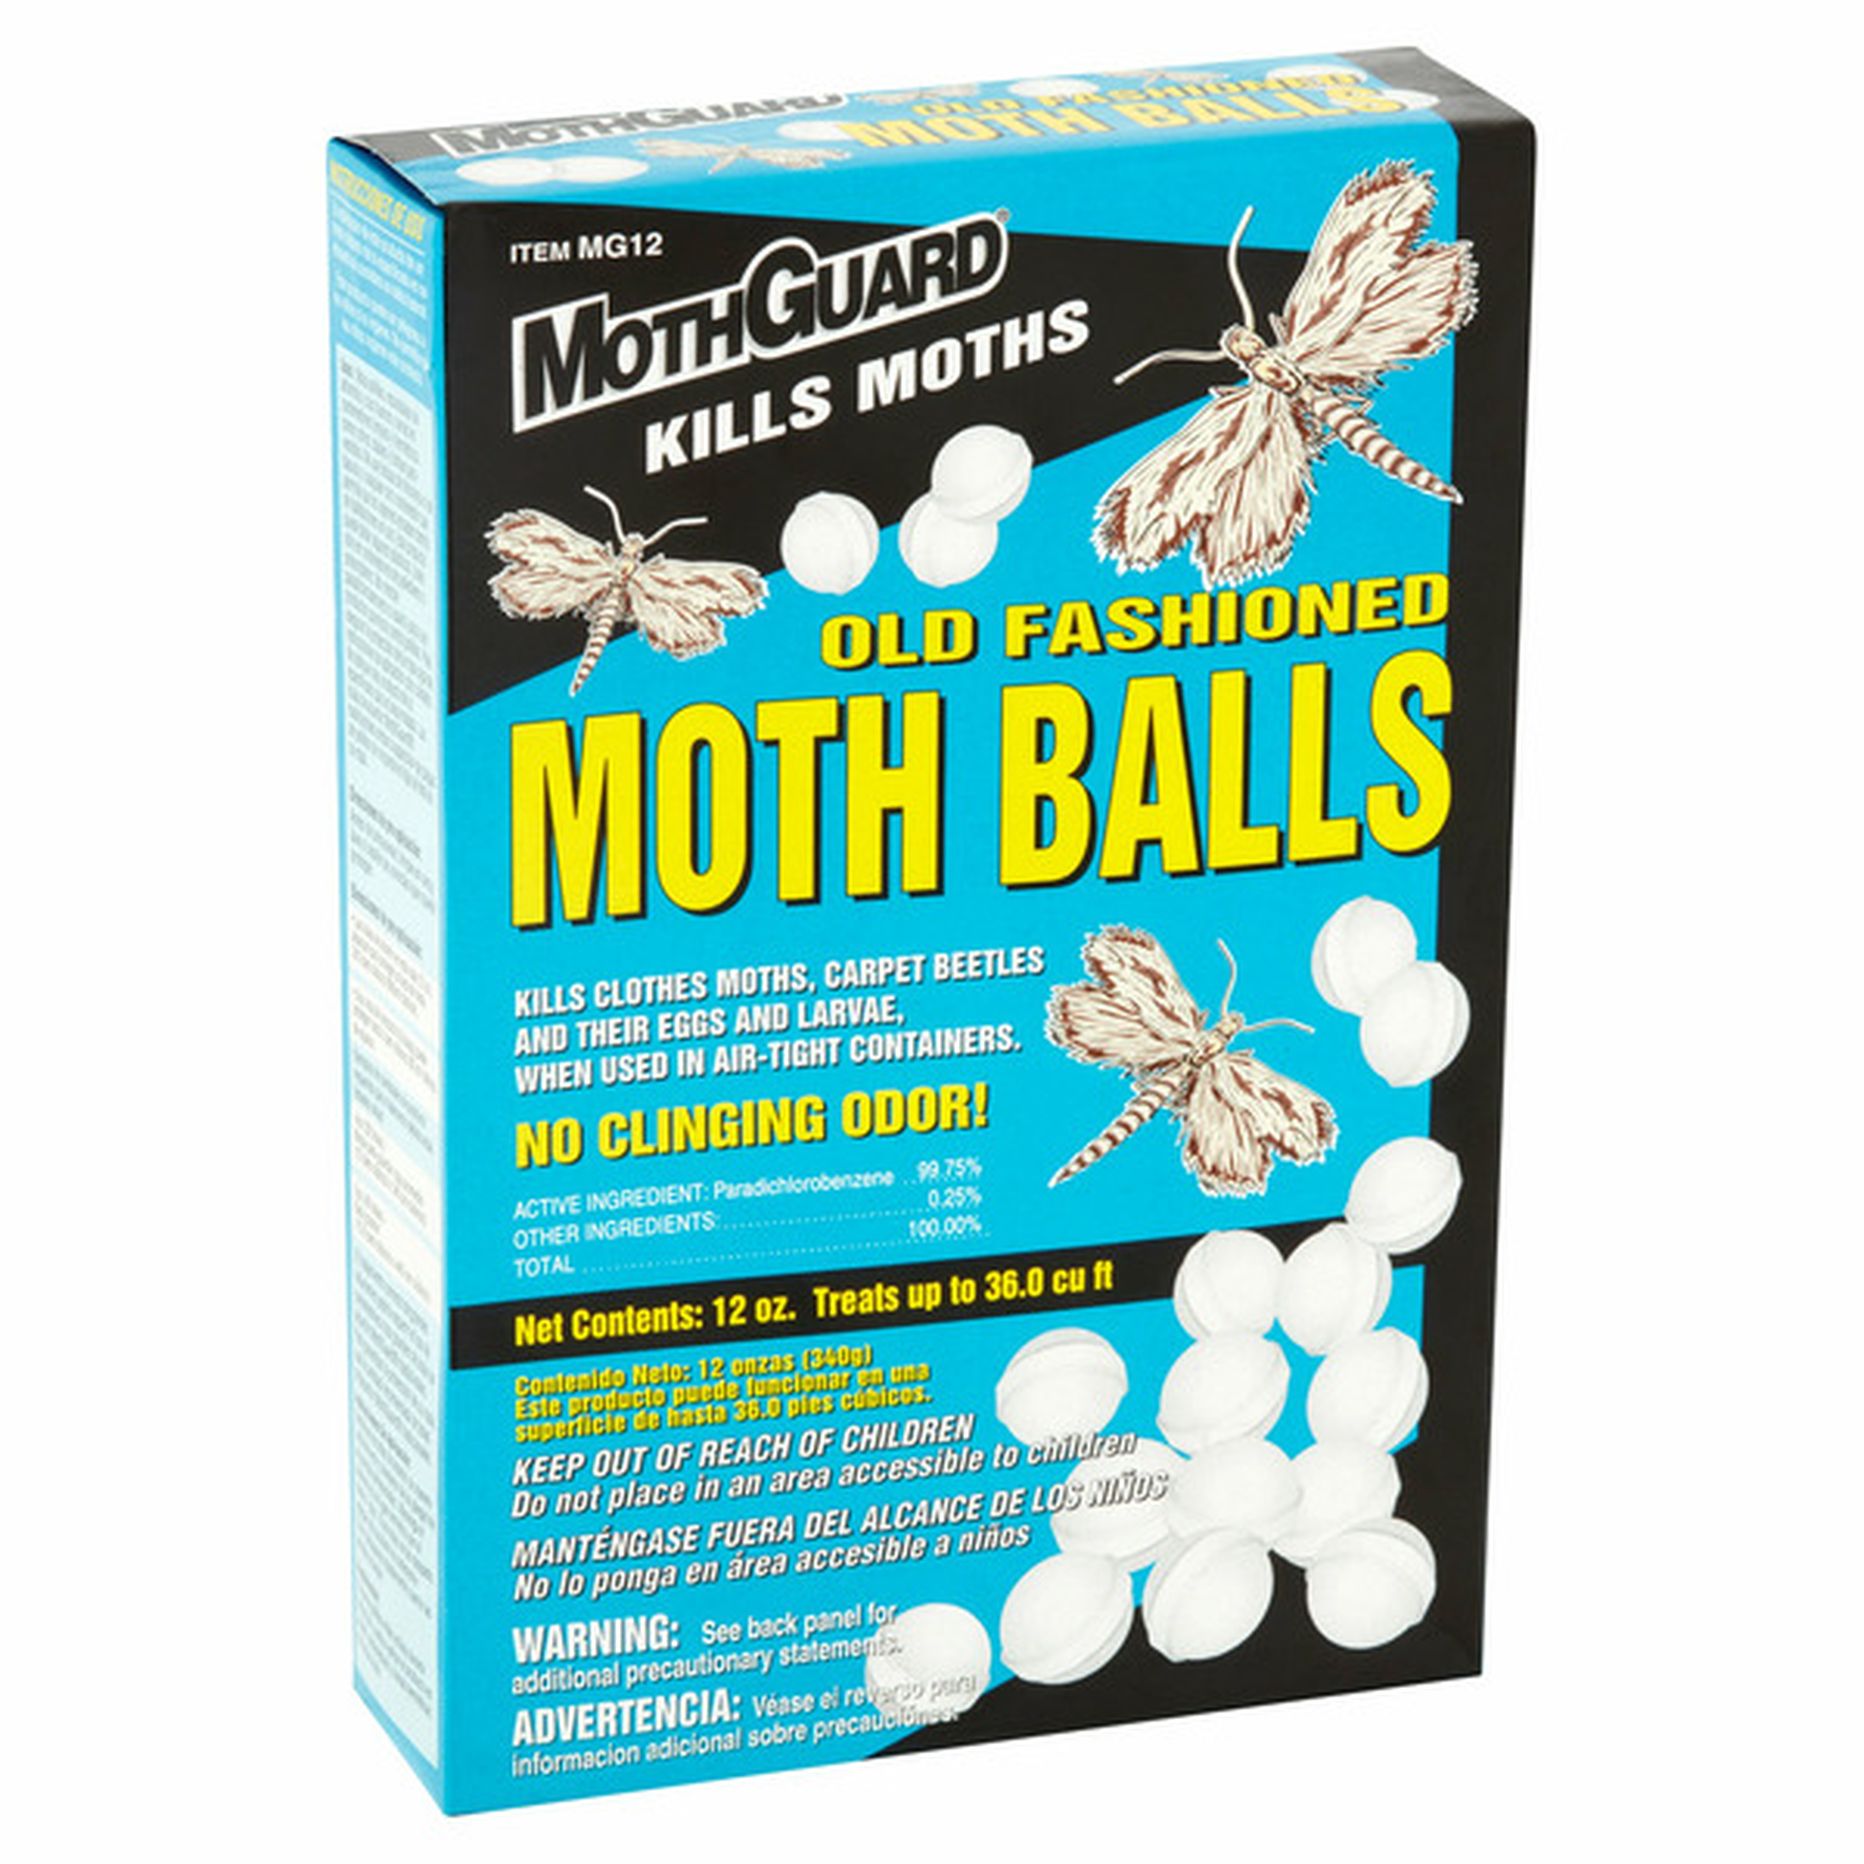 Mothguard Old Fashioned Moth Balls (12 oz) Delivery or Pickup Near Me ...